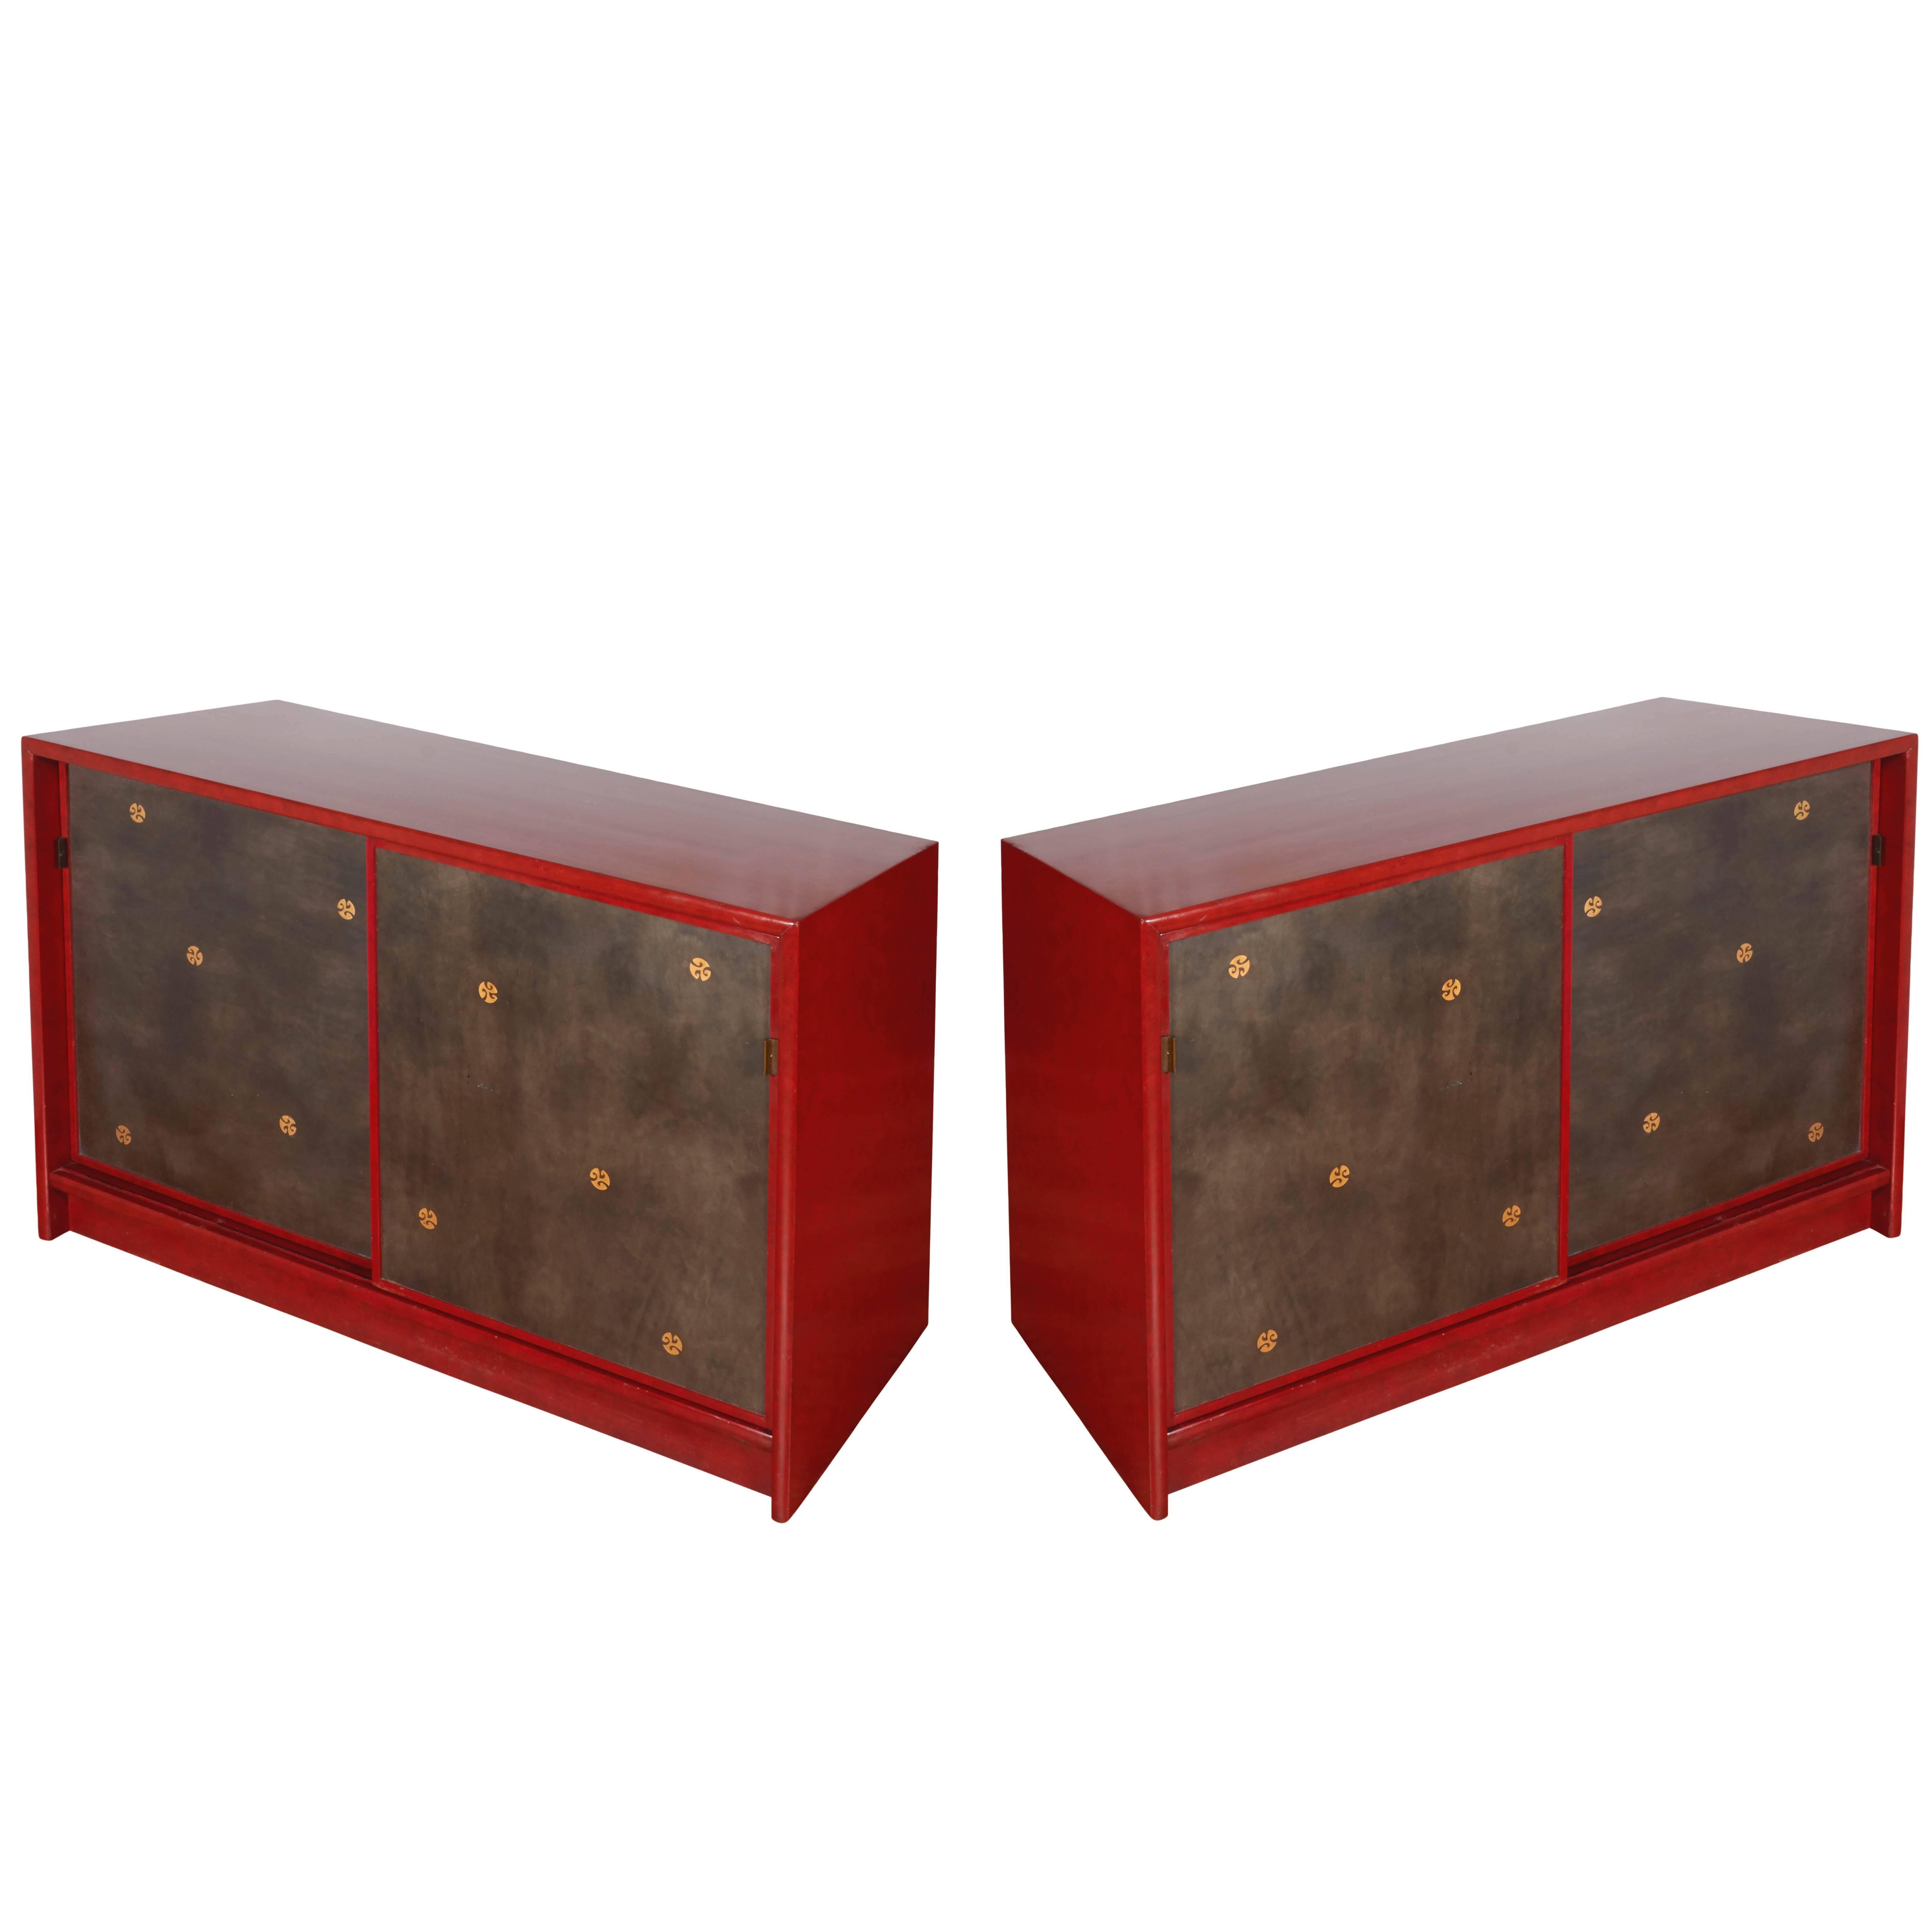 Pair of Tommi Parzinger Style Red Lacquer Asian Cabinets